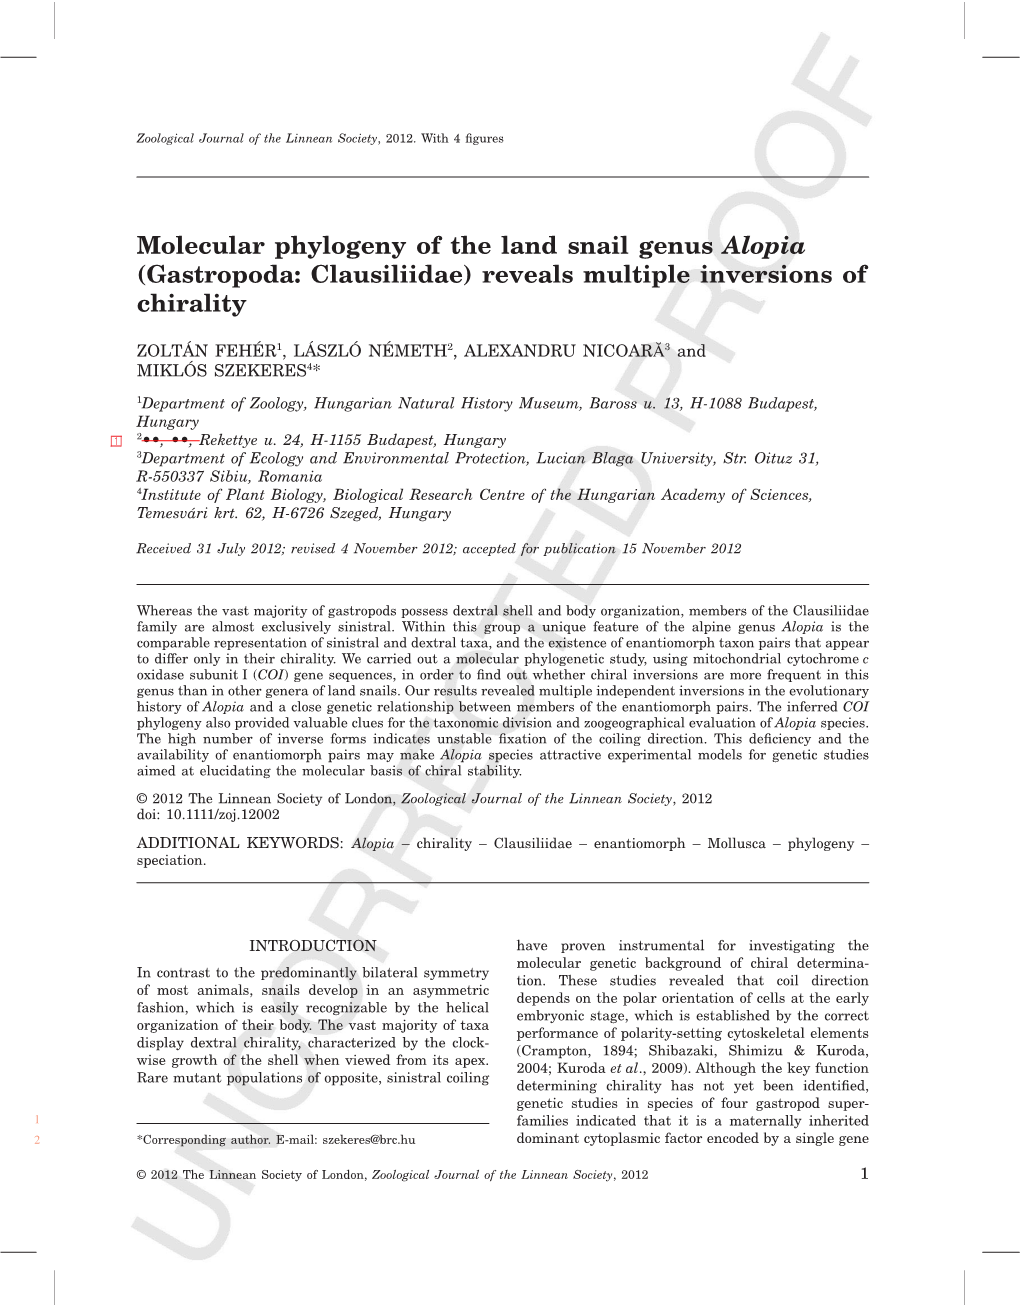 Molecular Phylogeny of the Land Snail Genus Alopia (Gastropoda: Clausiliidae) Reveals Multiple Inversions of Chirality